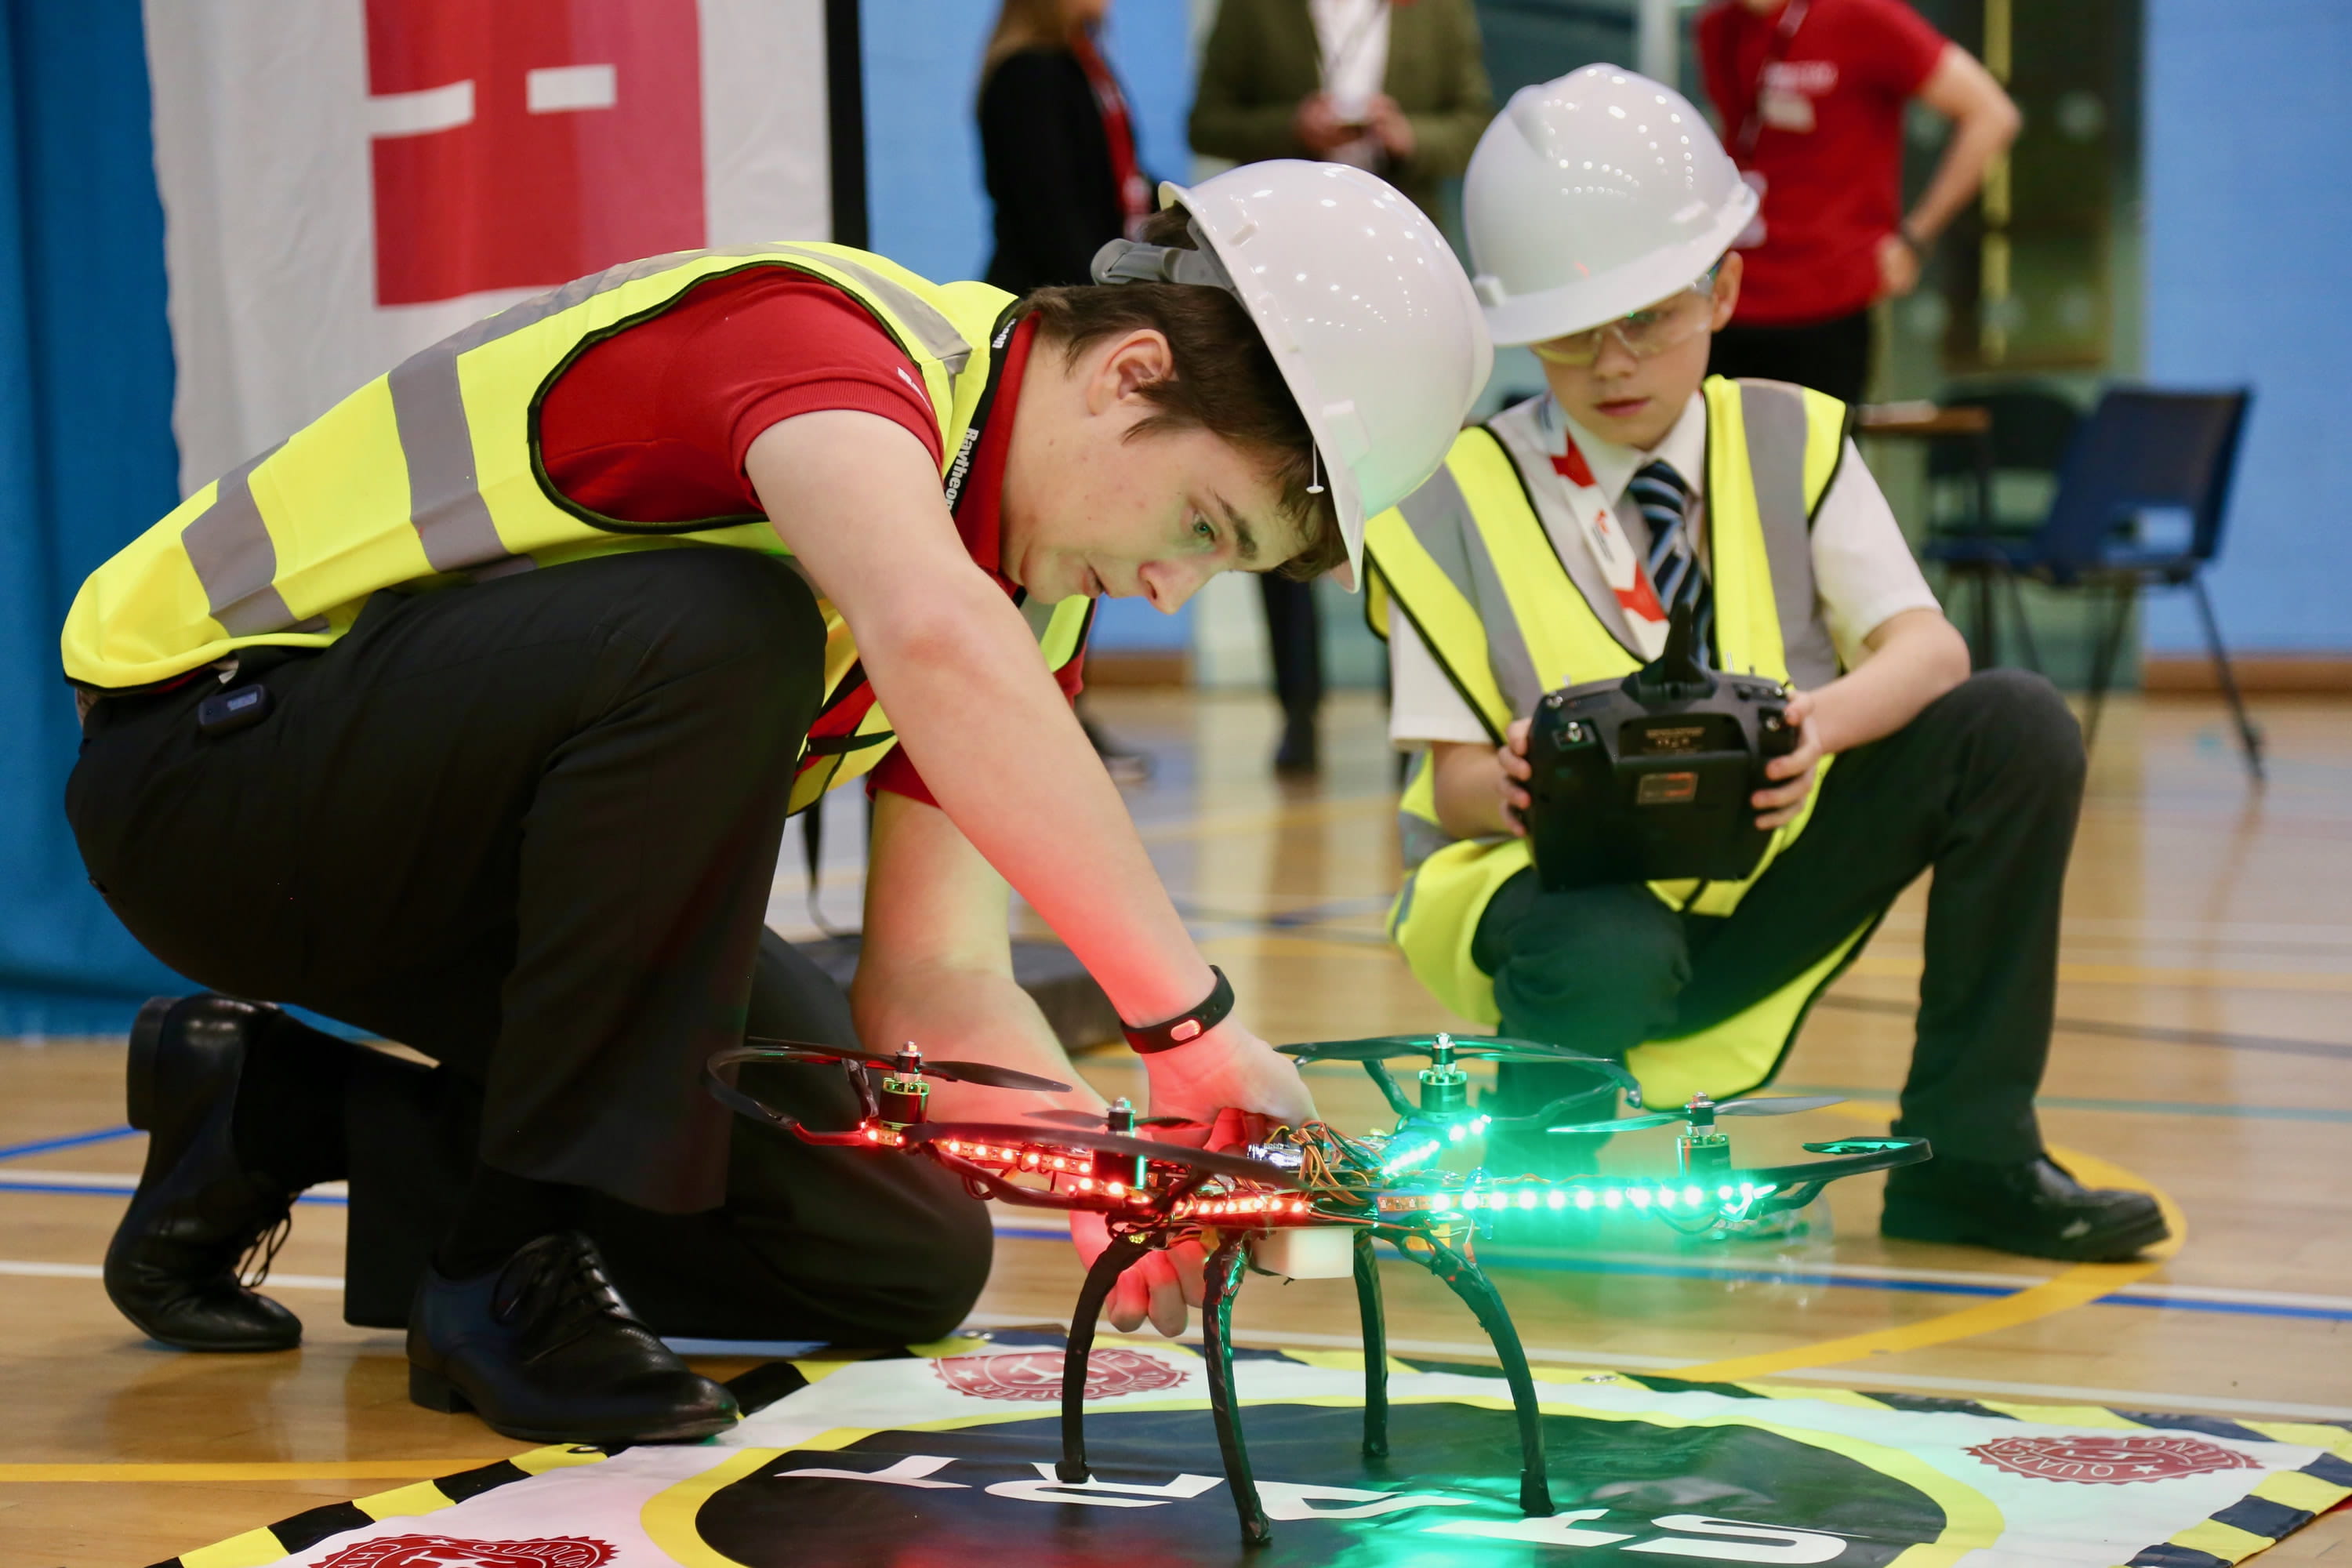 Team members prepare their quadcopter to fly during the 2017 Raytheon UK Quadcopter Challenge regional competition. The event is designed to show young people that a career in engineering can be as hands-on as they may enjoy.